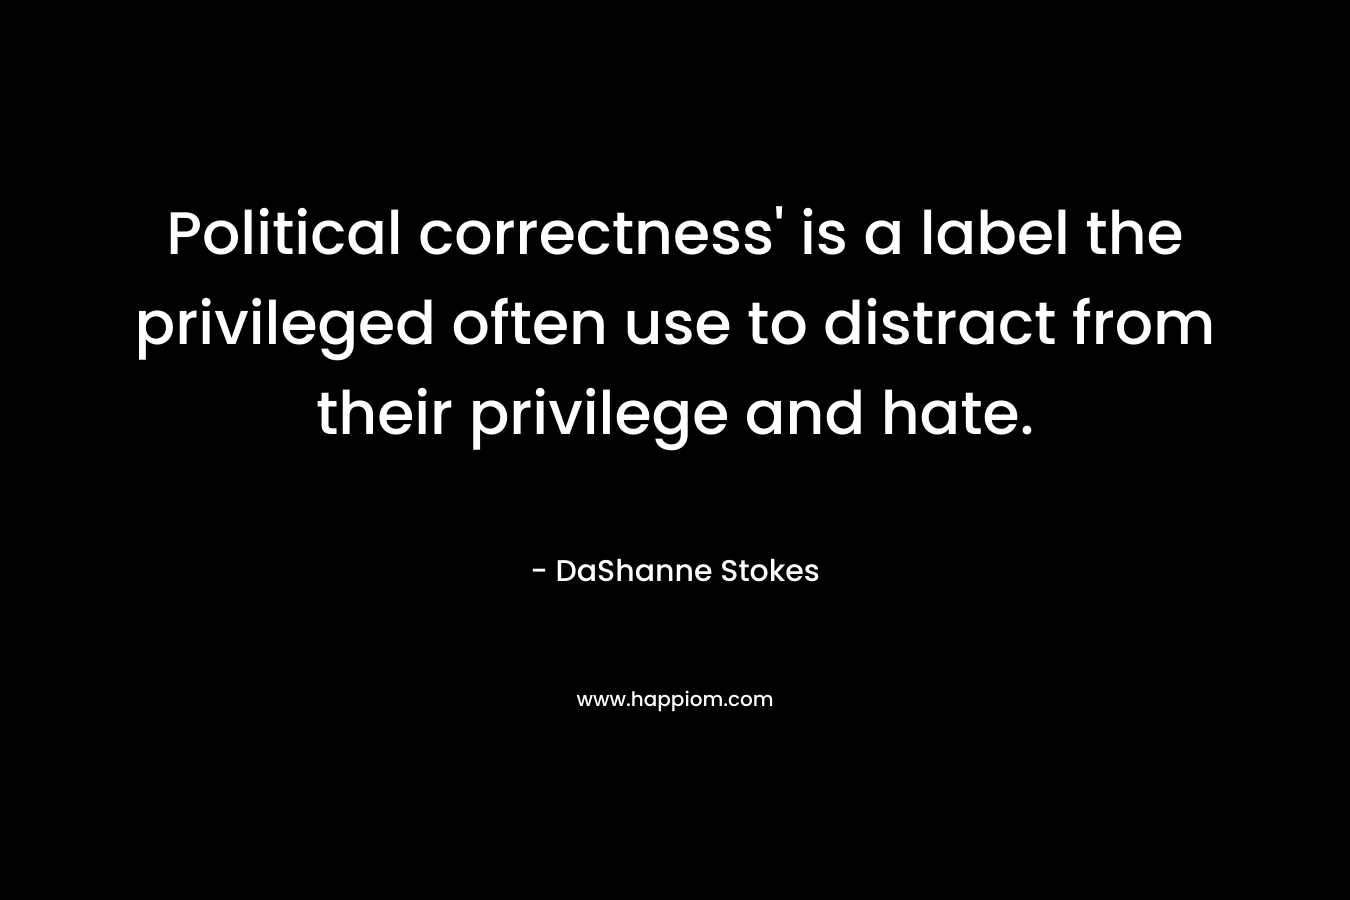 Political correctness’ is a label the privileged often use to distract from their privilege and hate. – DaShanne Stokes